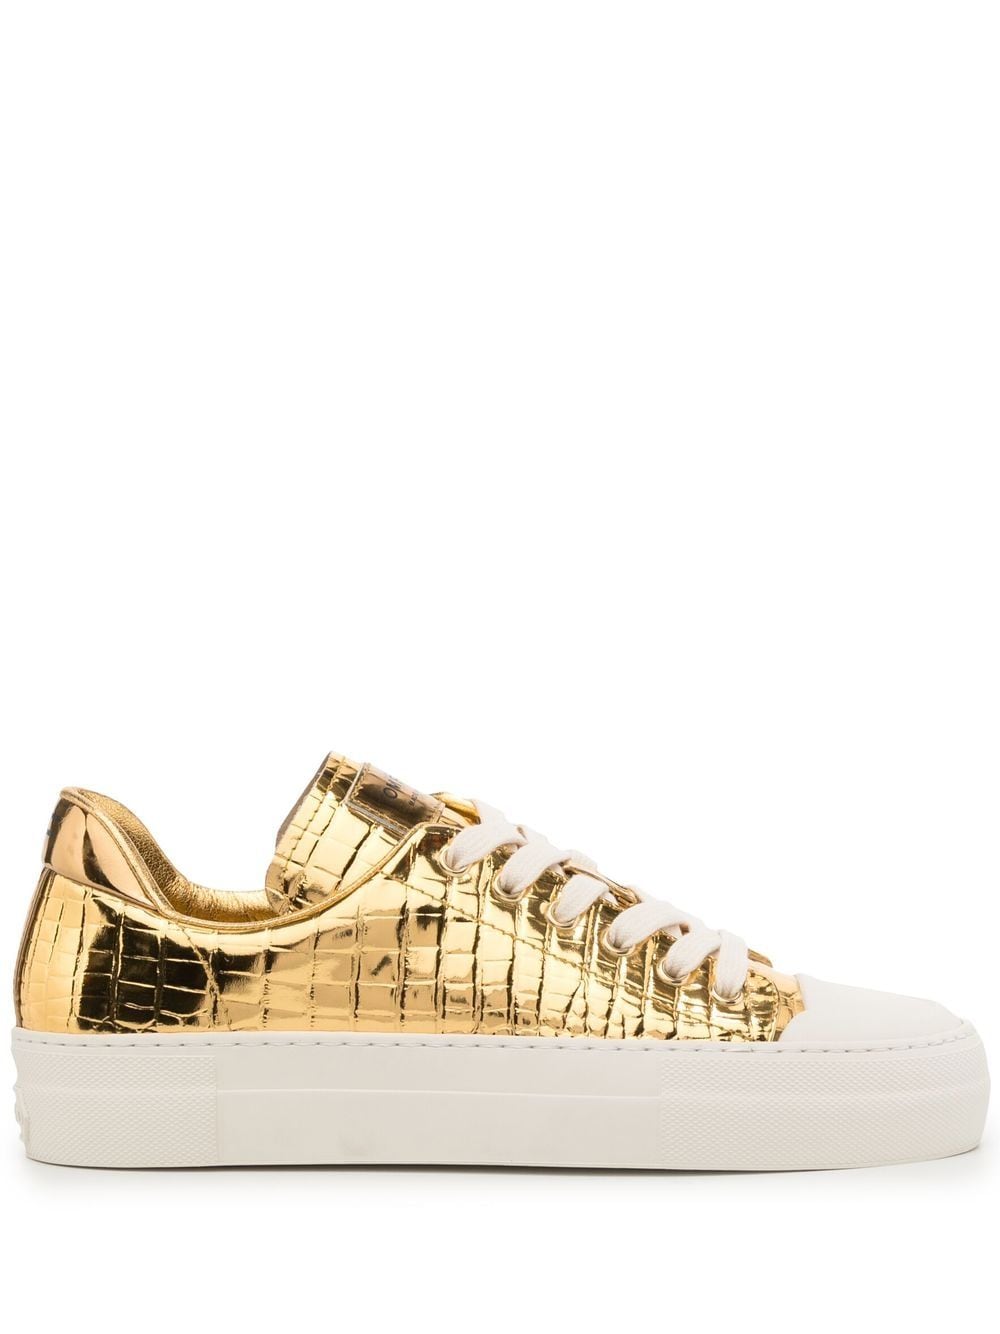 TOM FORD crocodile-embossed metallic sneakers - Gold von TOM FORD